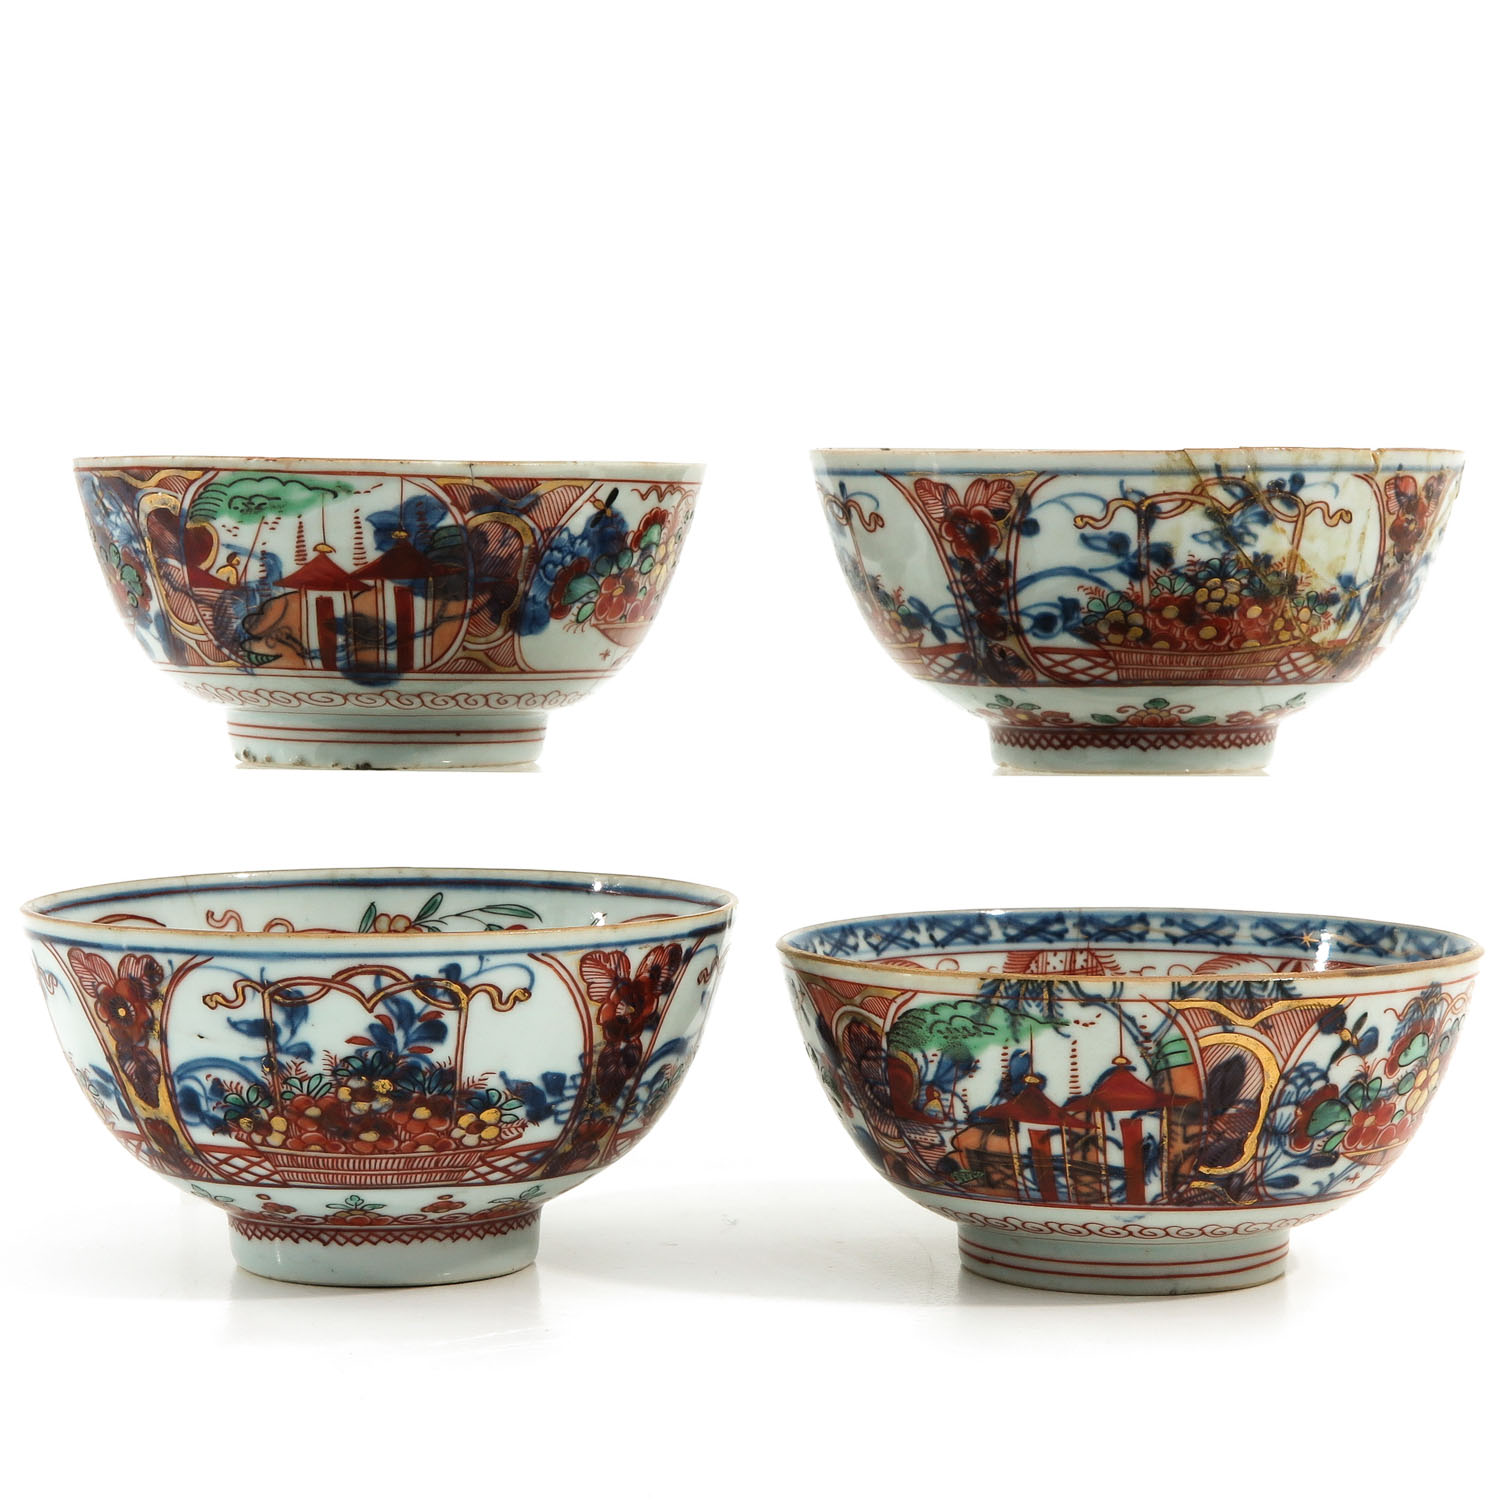 A Series of 4 Bowls - Image 2 of 10